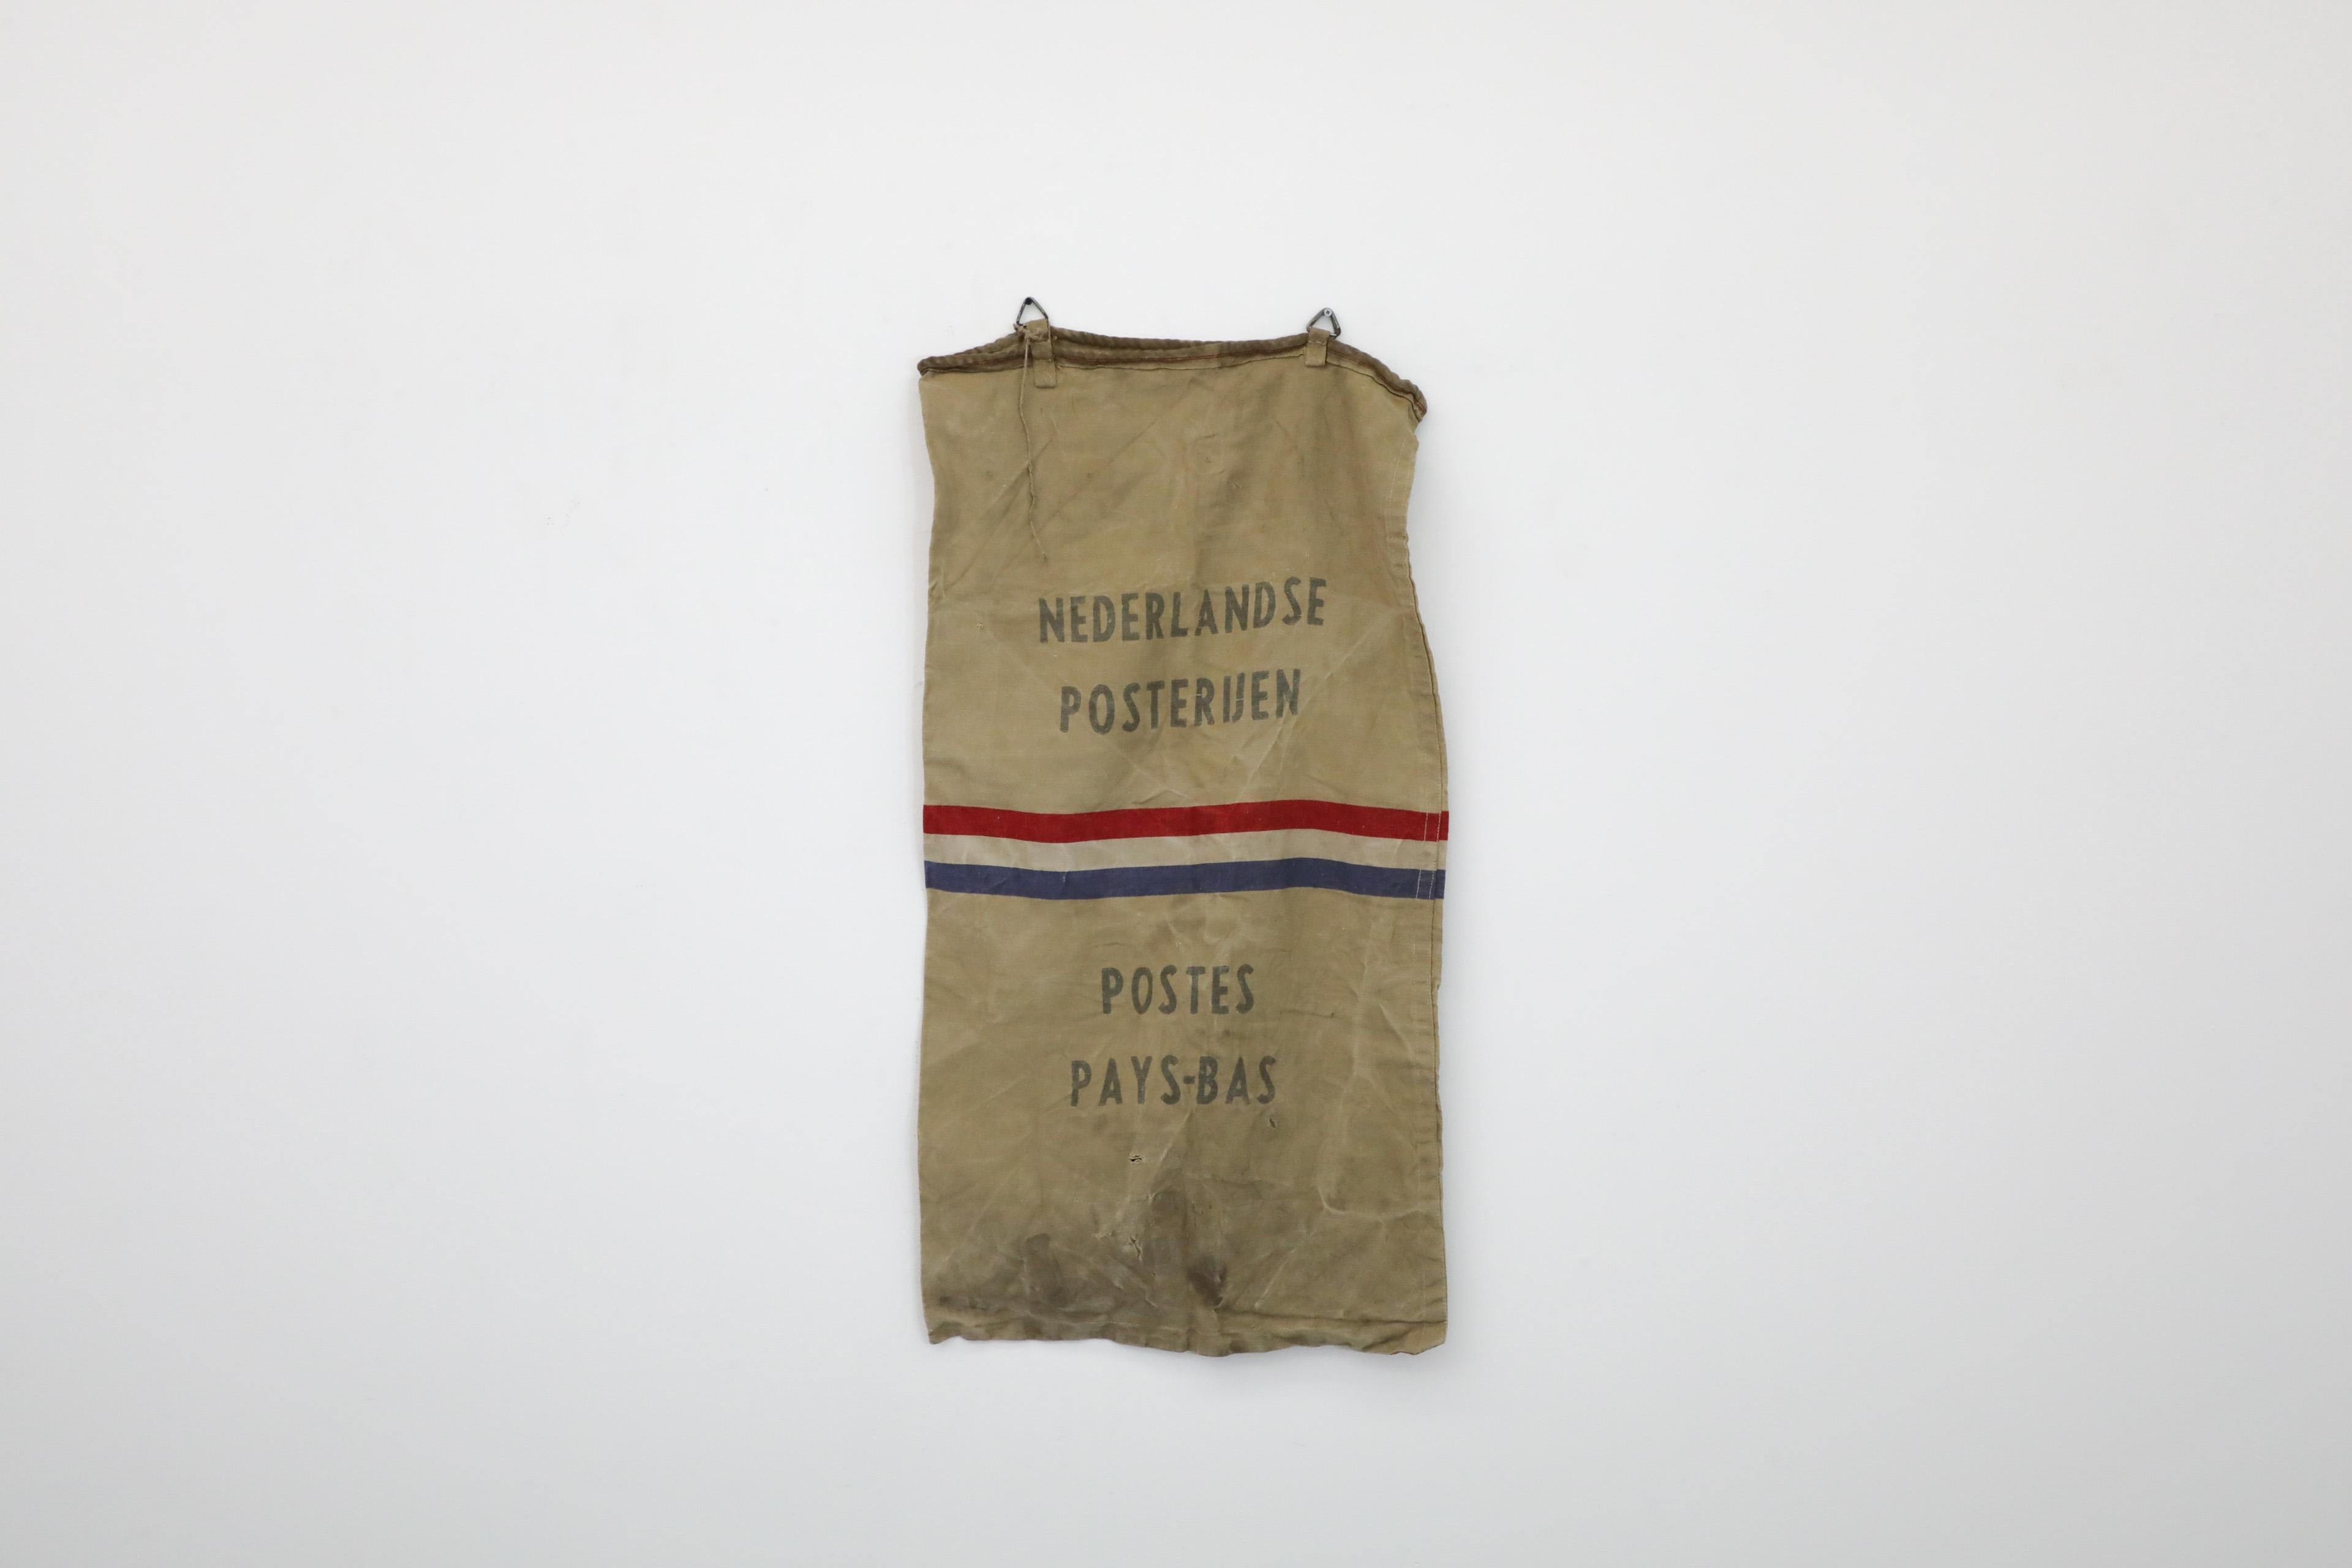 Vintage canvas postal bag with steel loops. 'Dutch Postal Service' stamped in Dutch and French hints that this piece is likely associated with shipments to bilingual Belgium. This well worn authentic postal bag makes for a stylish and historic